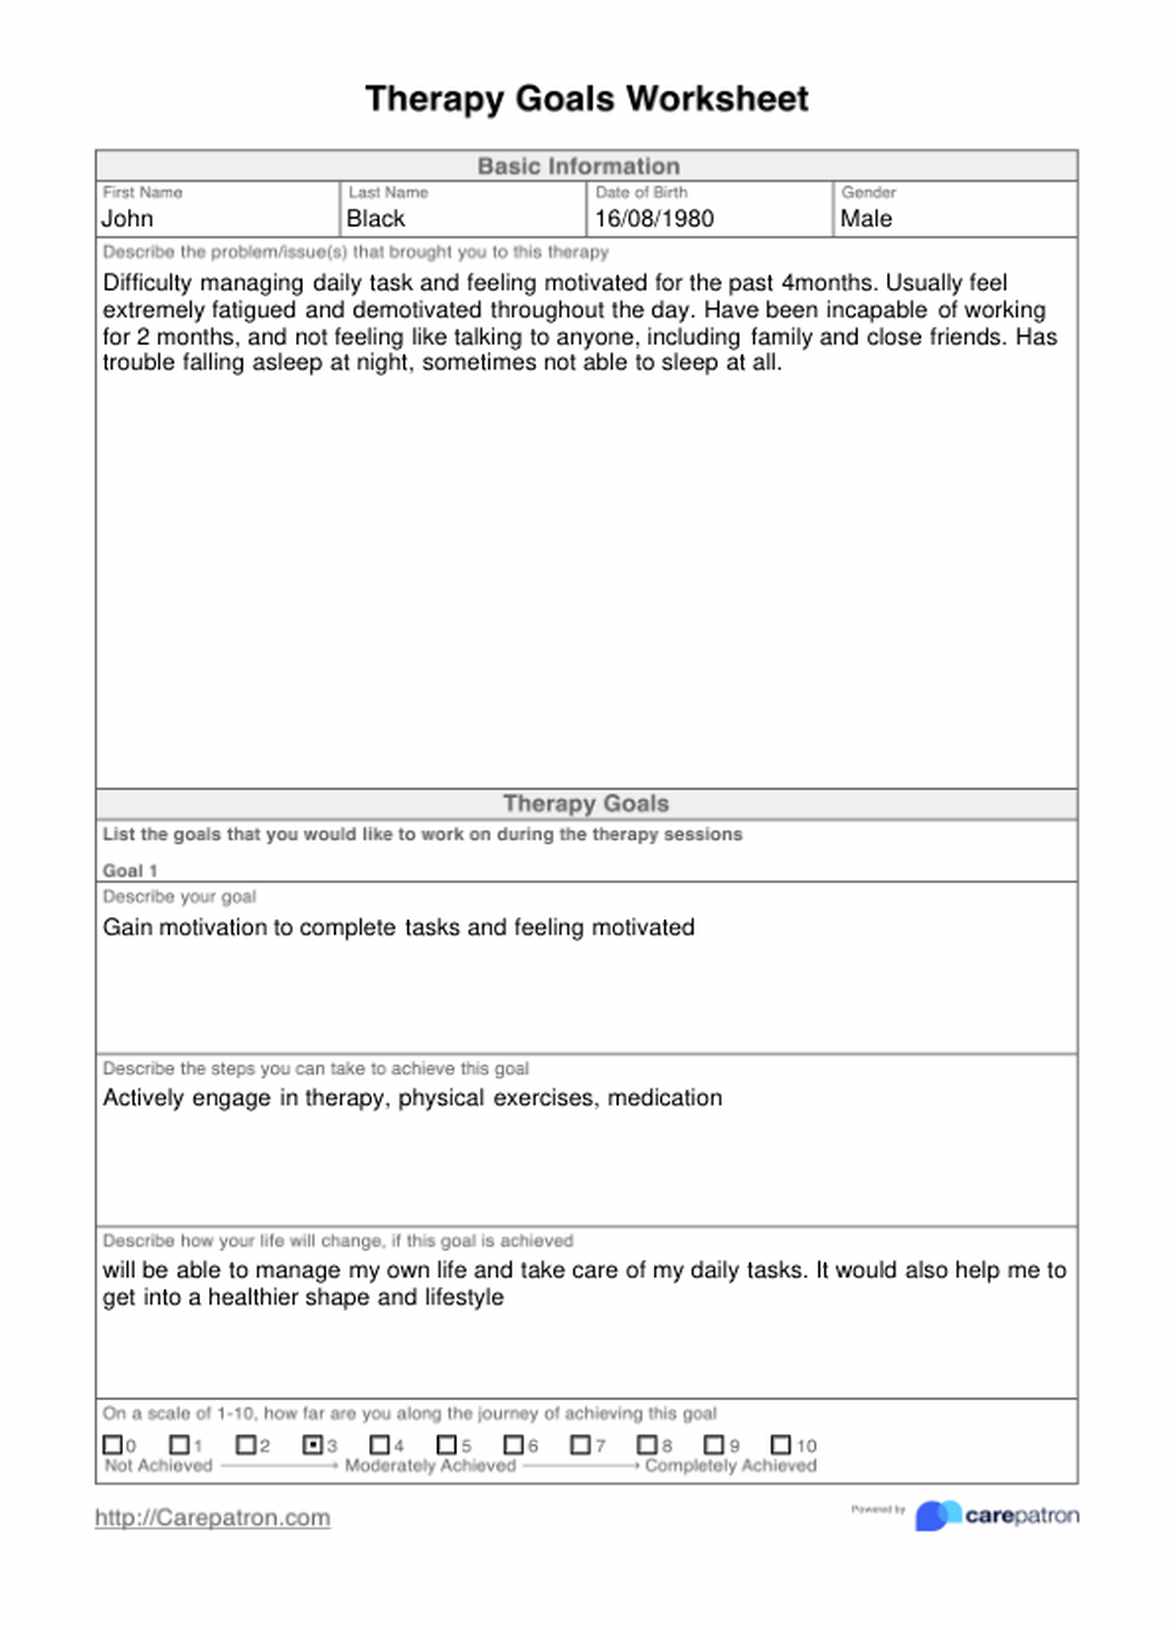 Therapy Goals Worksheet PDF Example